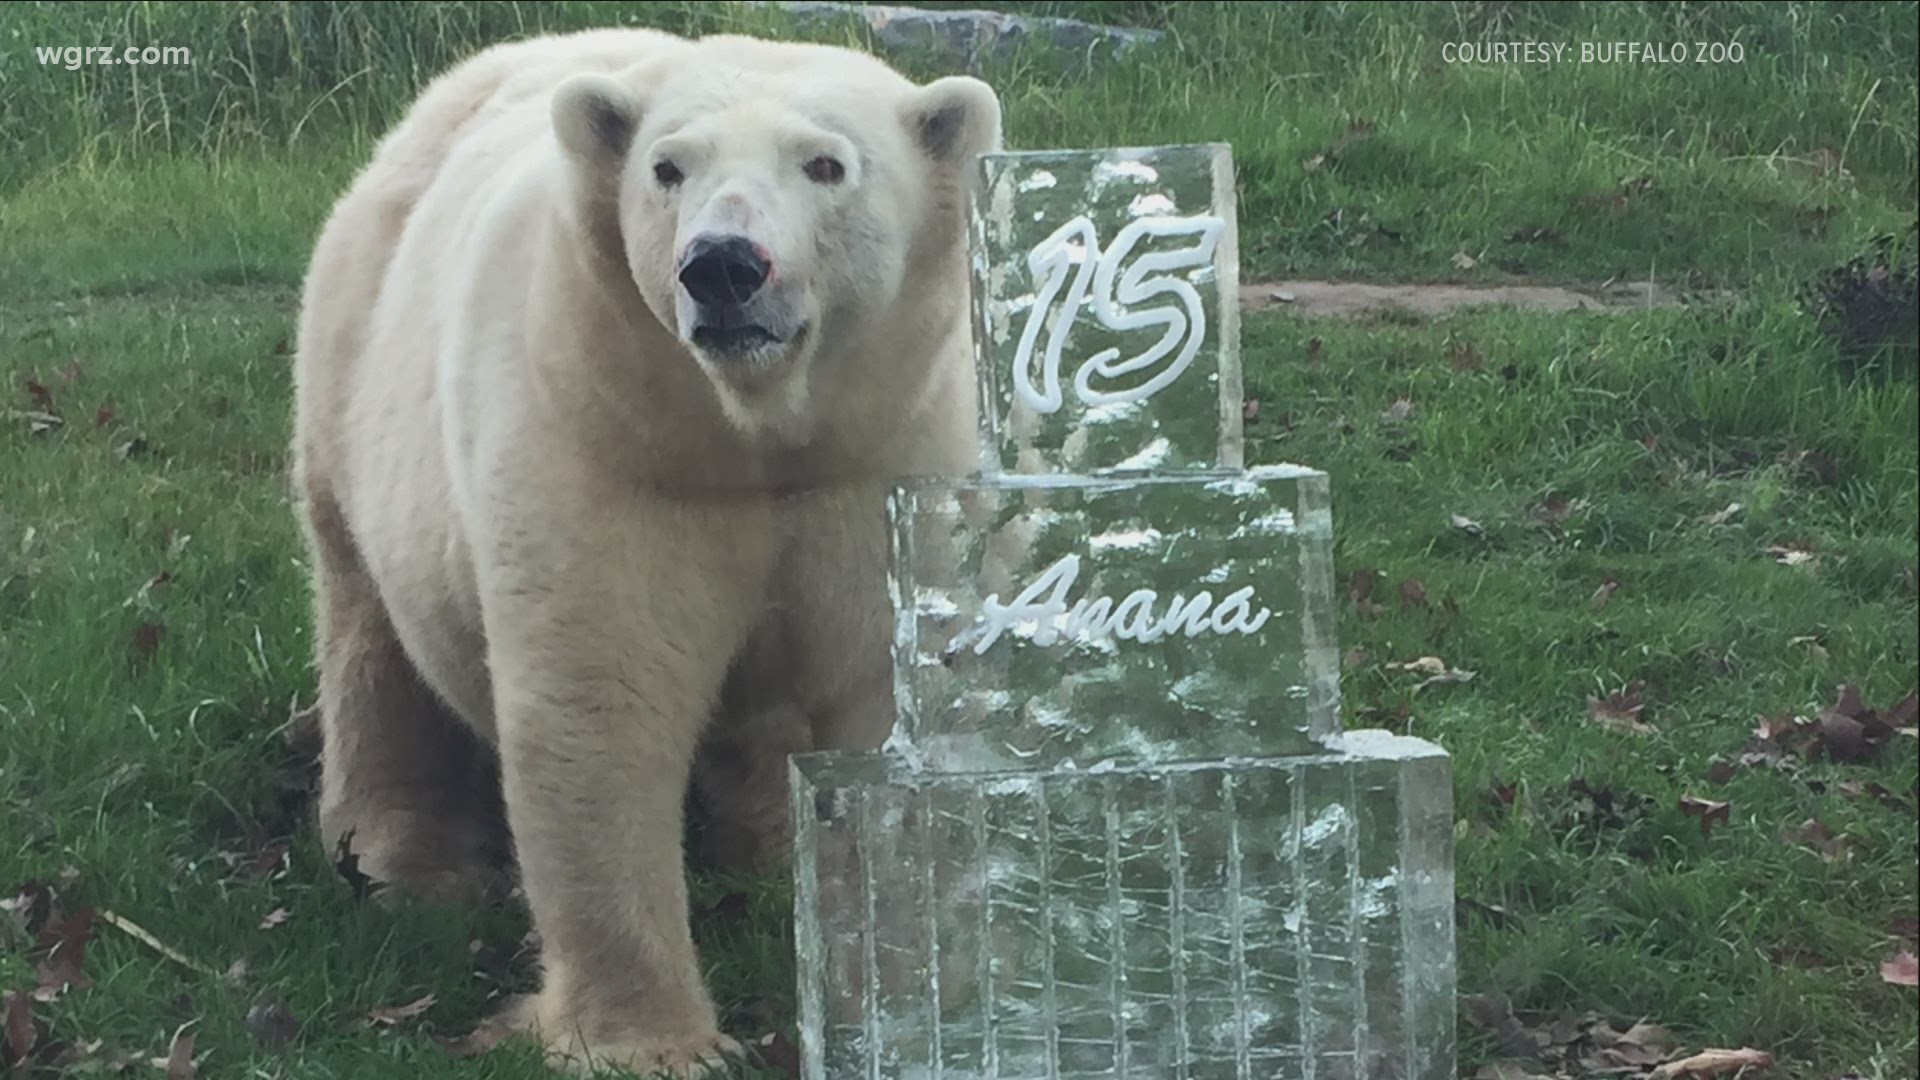 Detroit Zoo officials say the 20-year-old polar bear was killed when 16-year-old male polar bear Nuka was attempting to breed her.